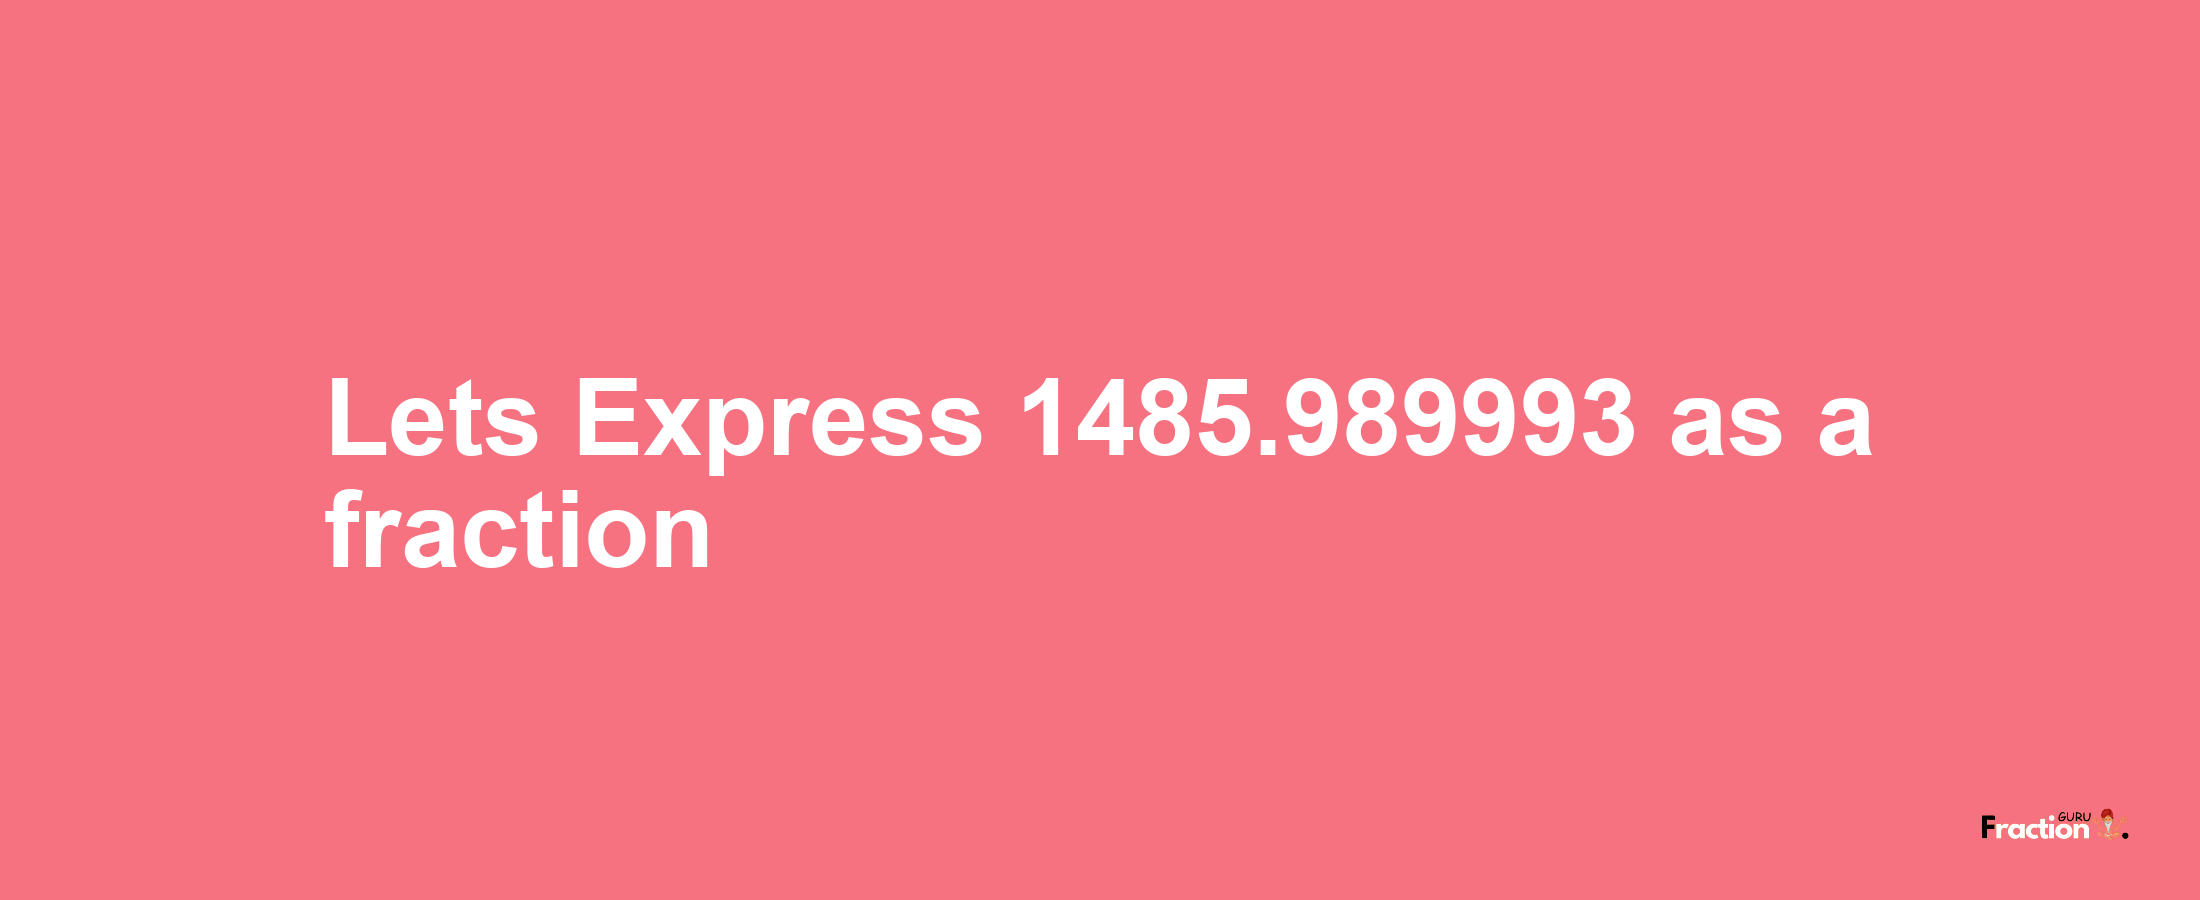 Lets Express 1485.989993 as afraction